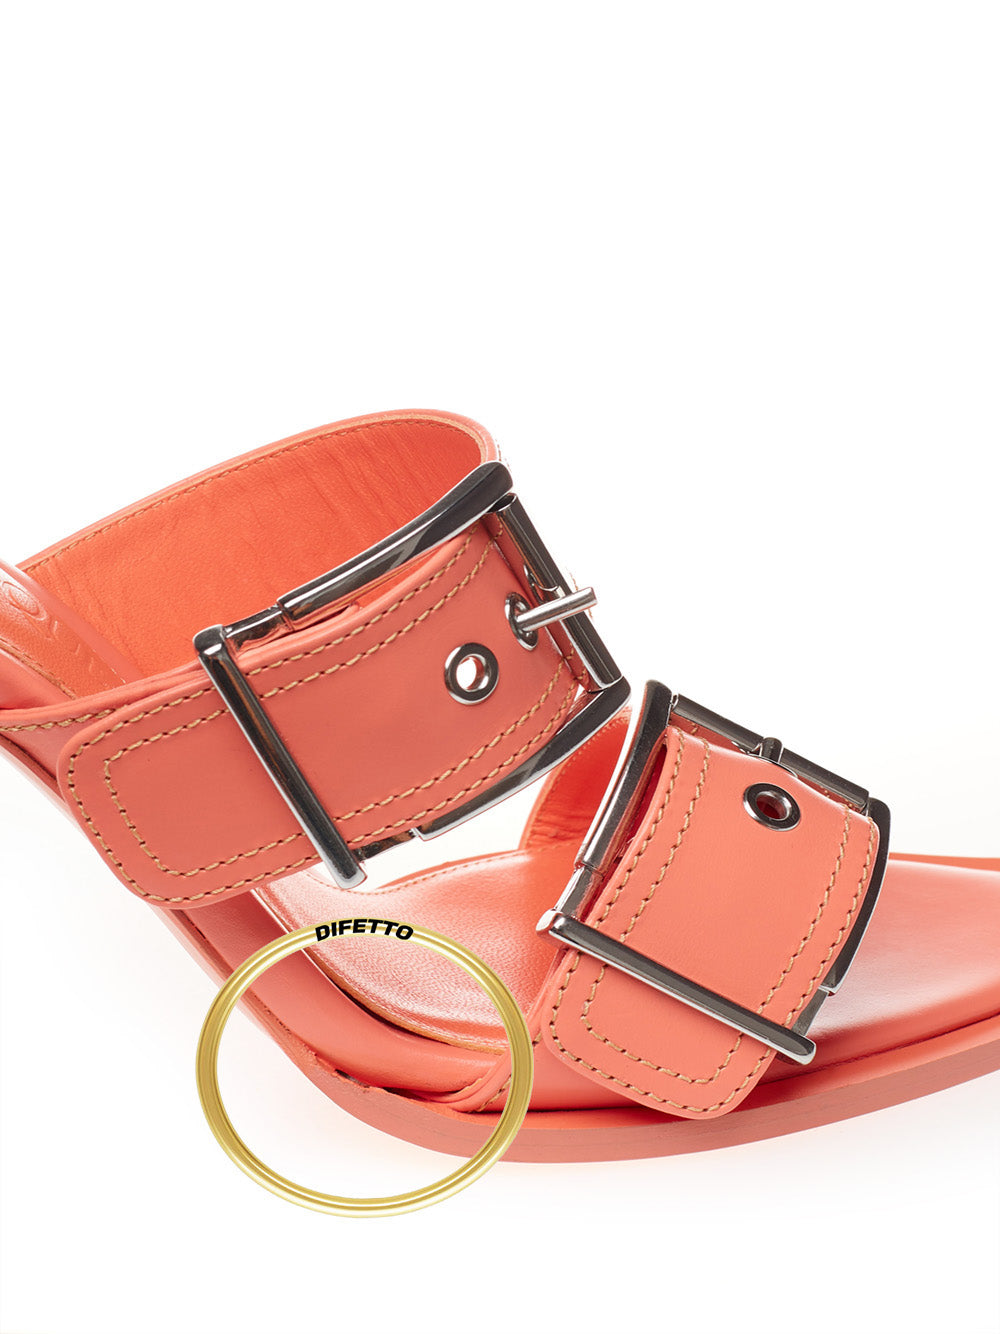 Sandal with Buckle